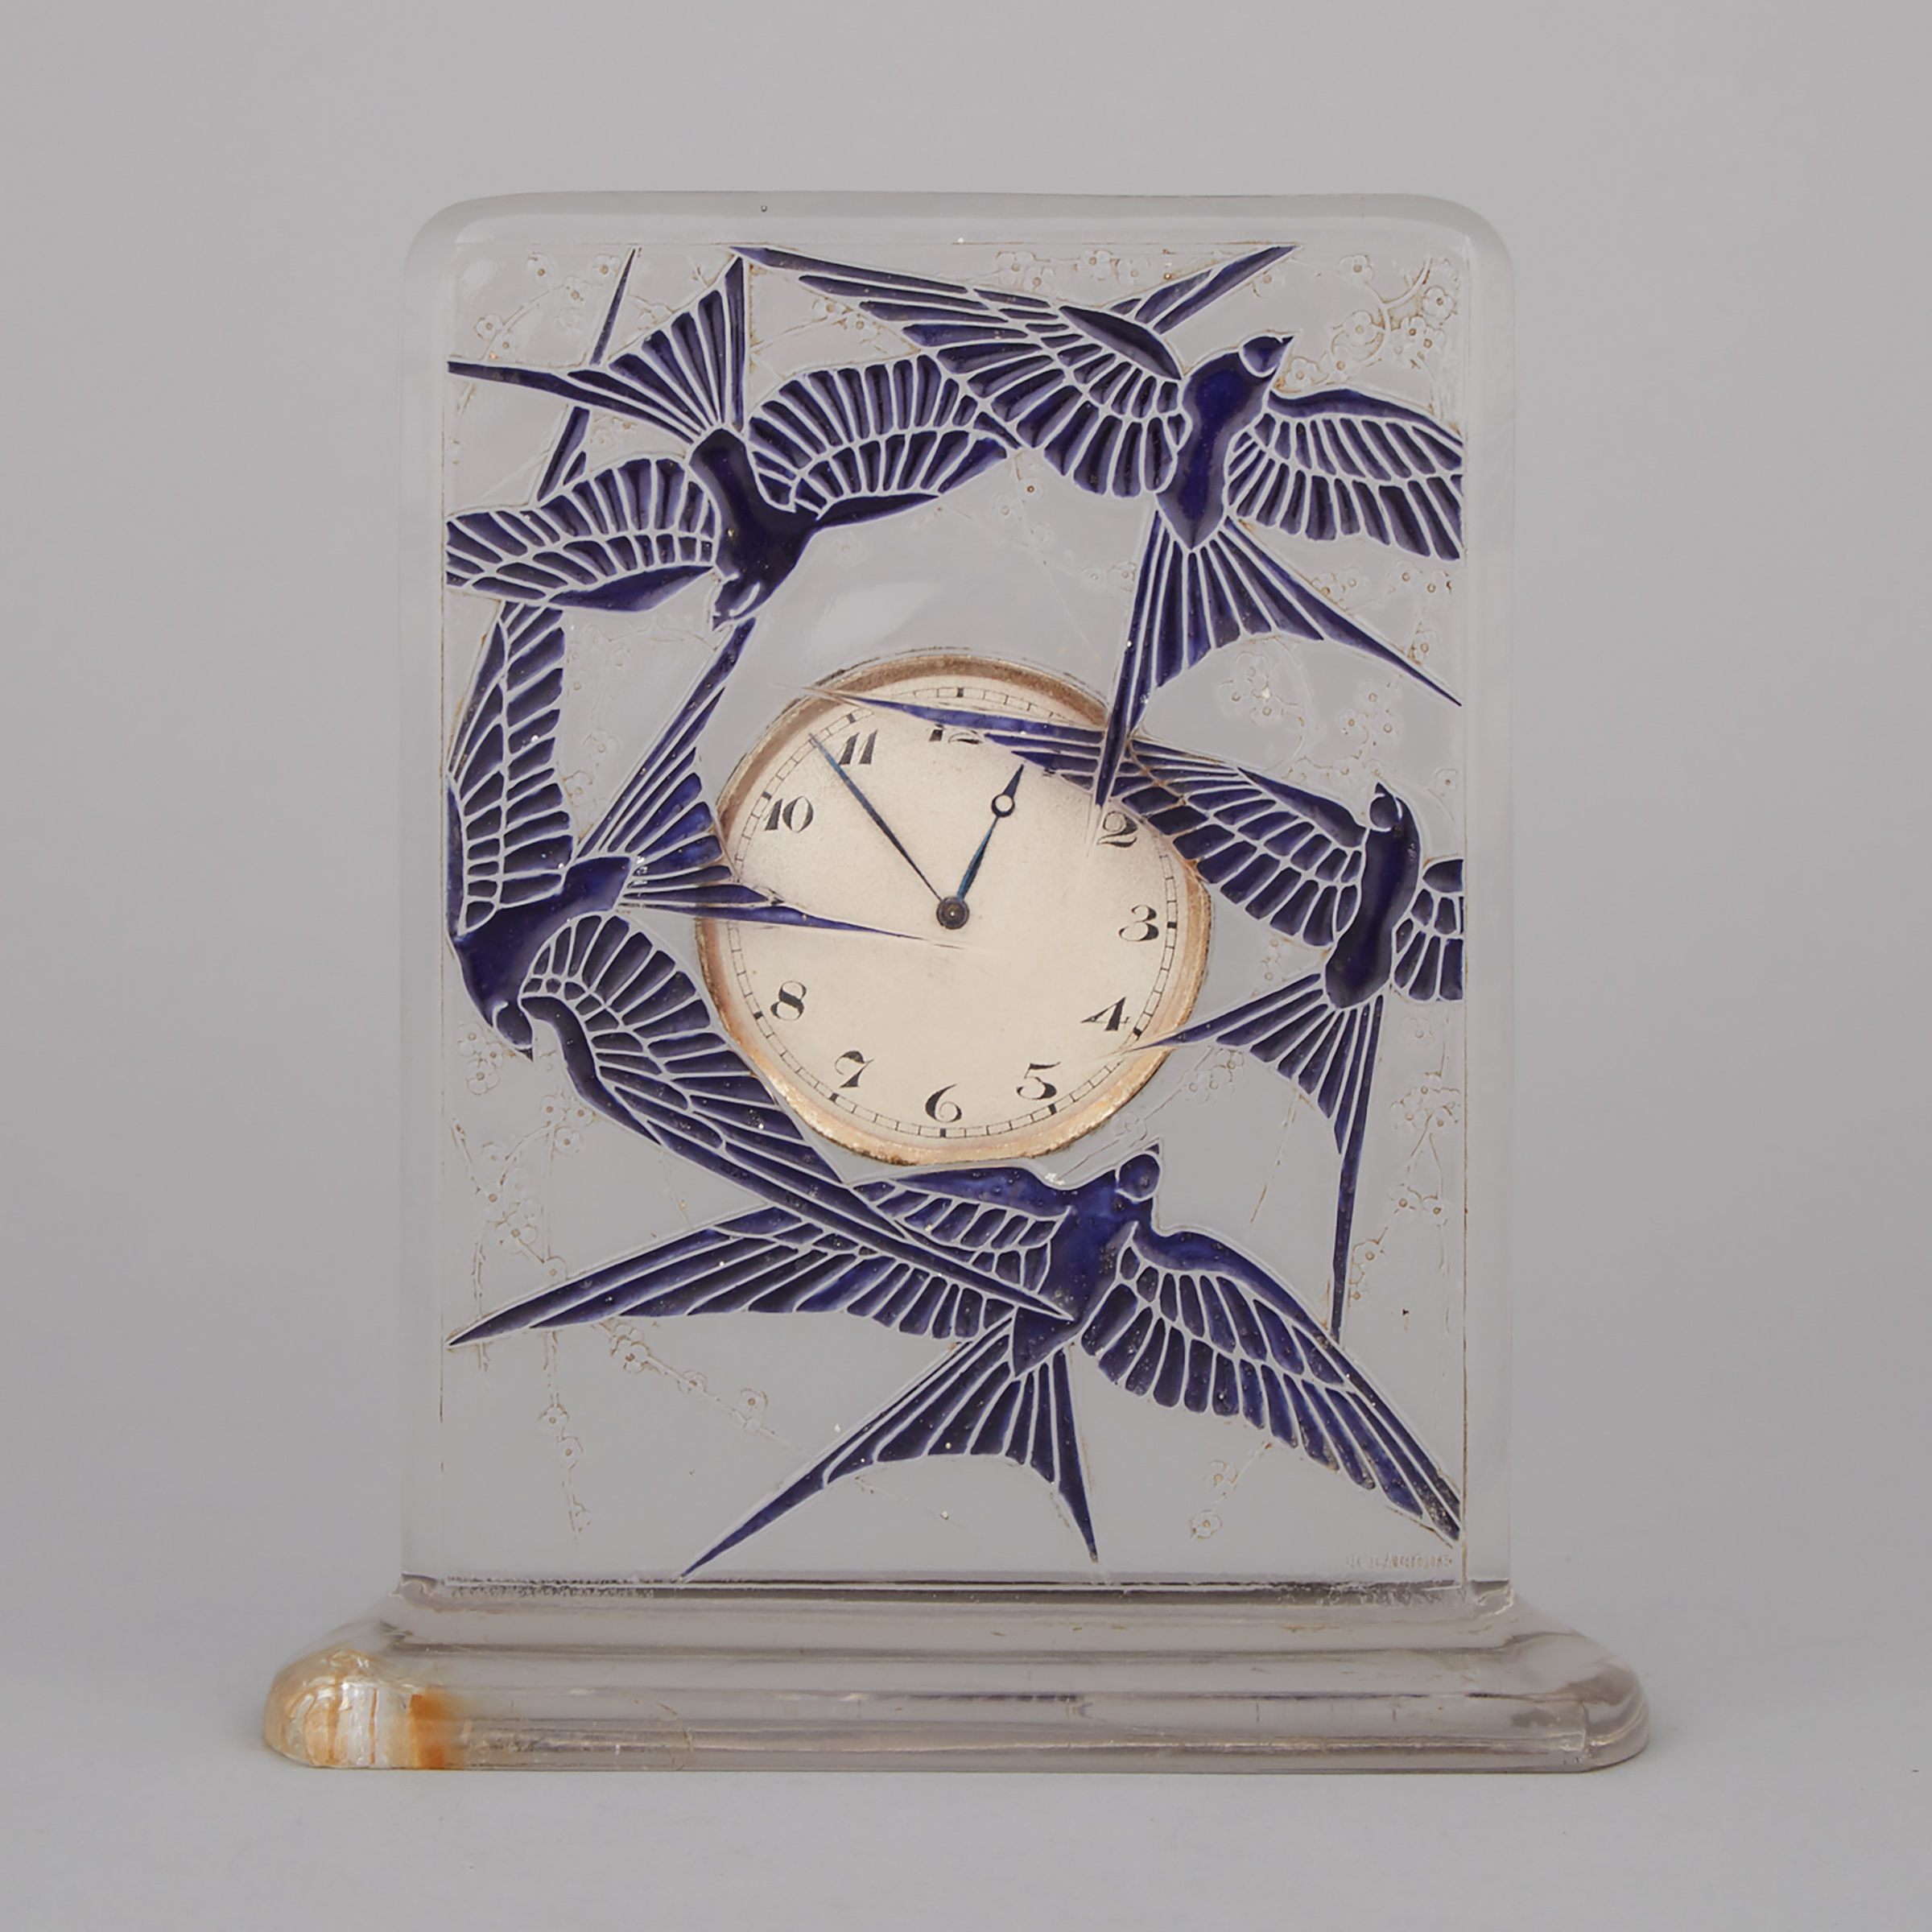 ‘Cinque Hirondelles’, Lalique Moulded and Blue Enameled Glass Table Clock, 1920s